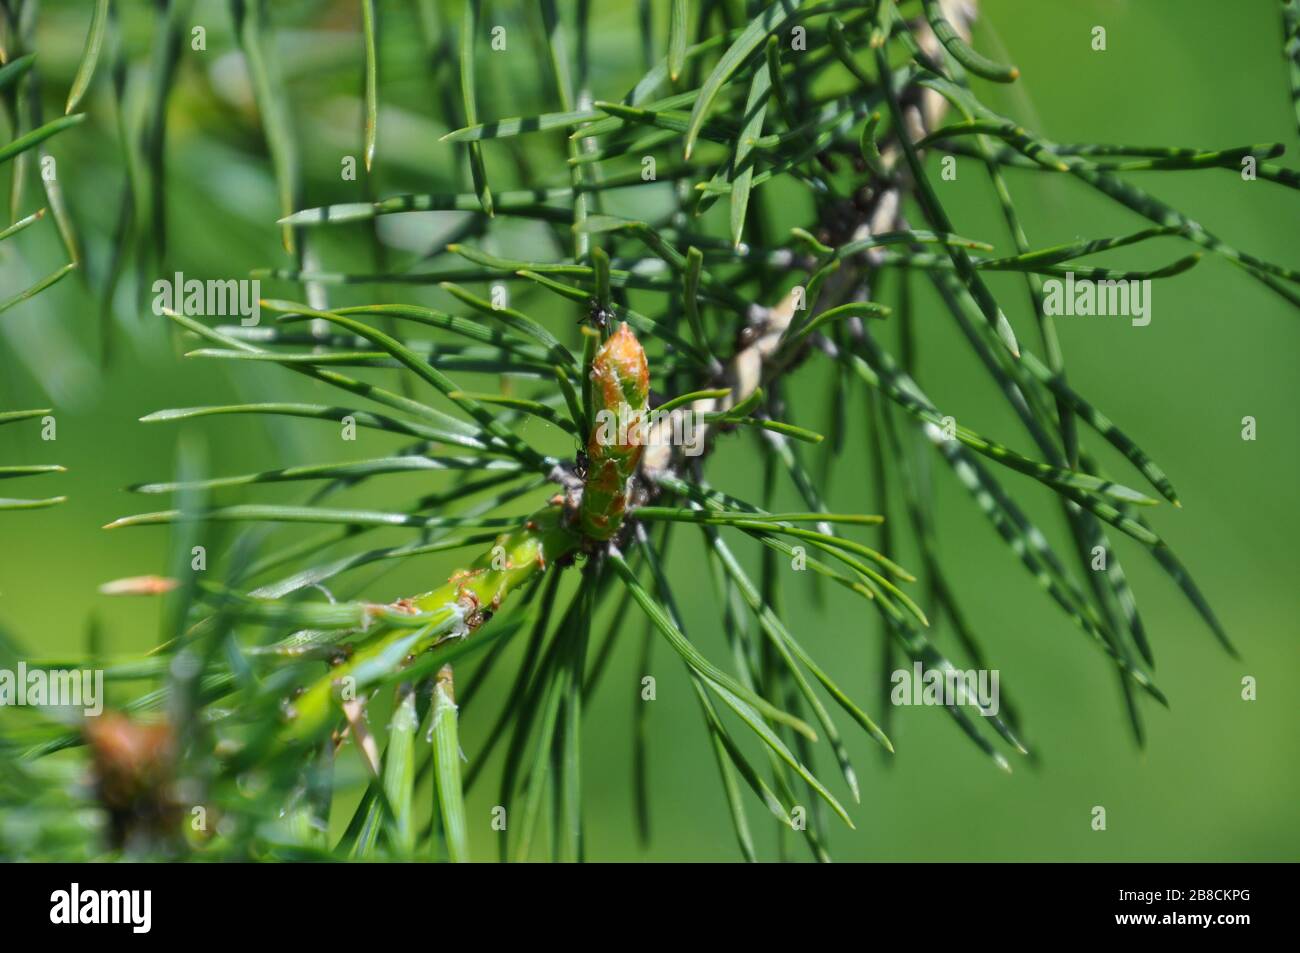 Close-up of needles and bud of pine tree Stock Photo